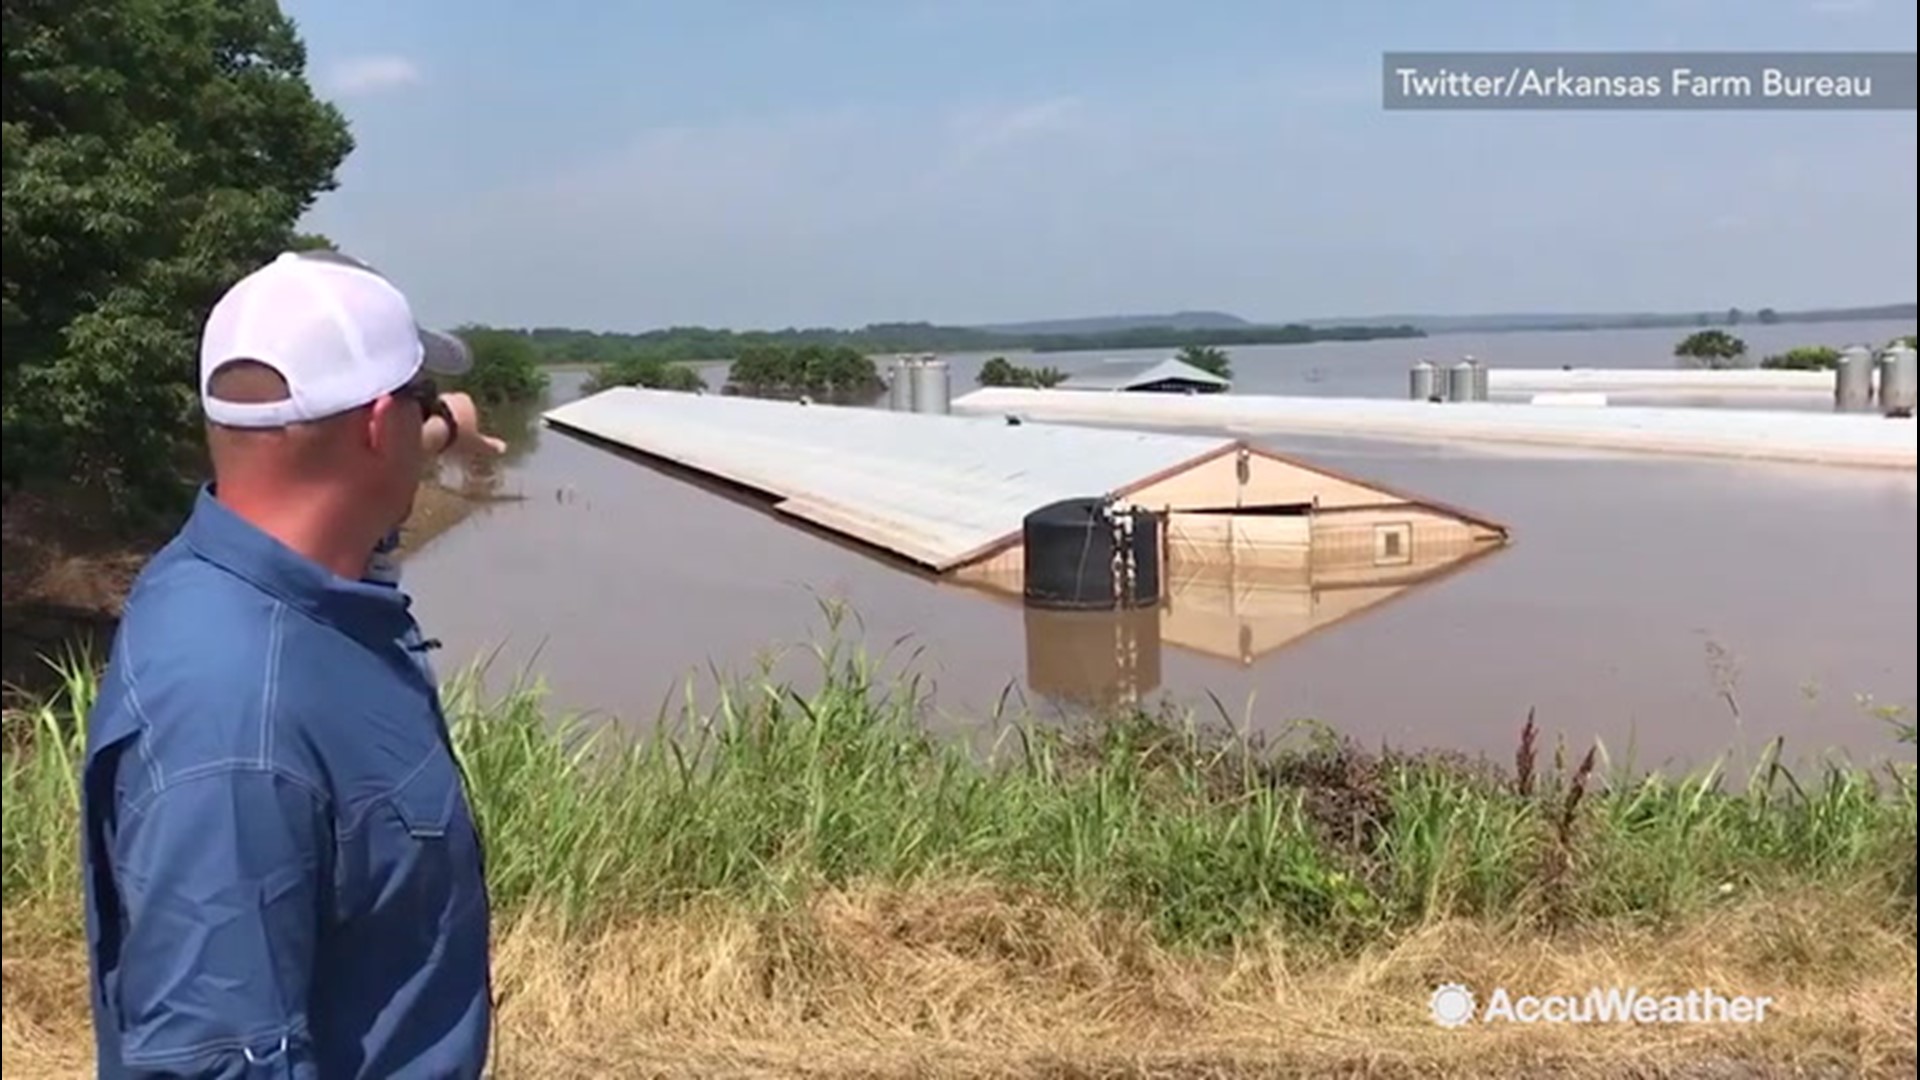 While weather conditions improved for farmers, the effects of last month's record flooding are having major financial repercussions for the agriculture industry.